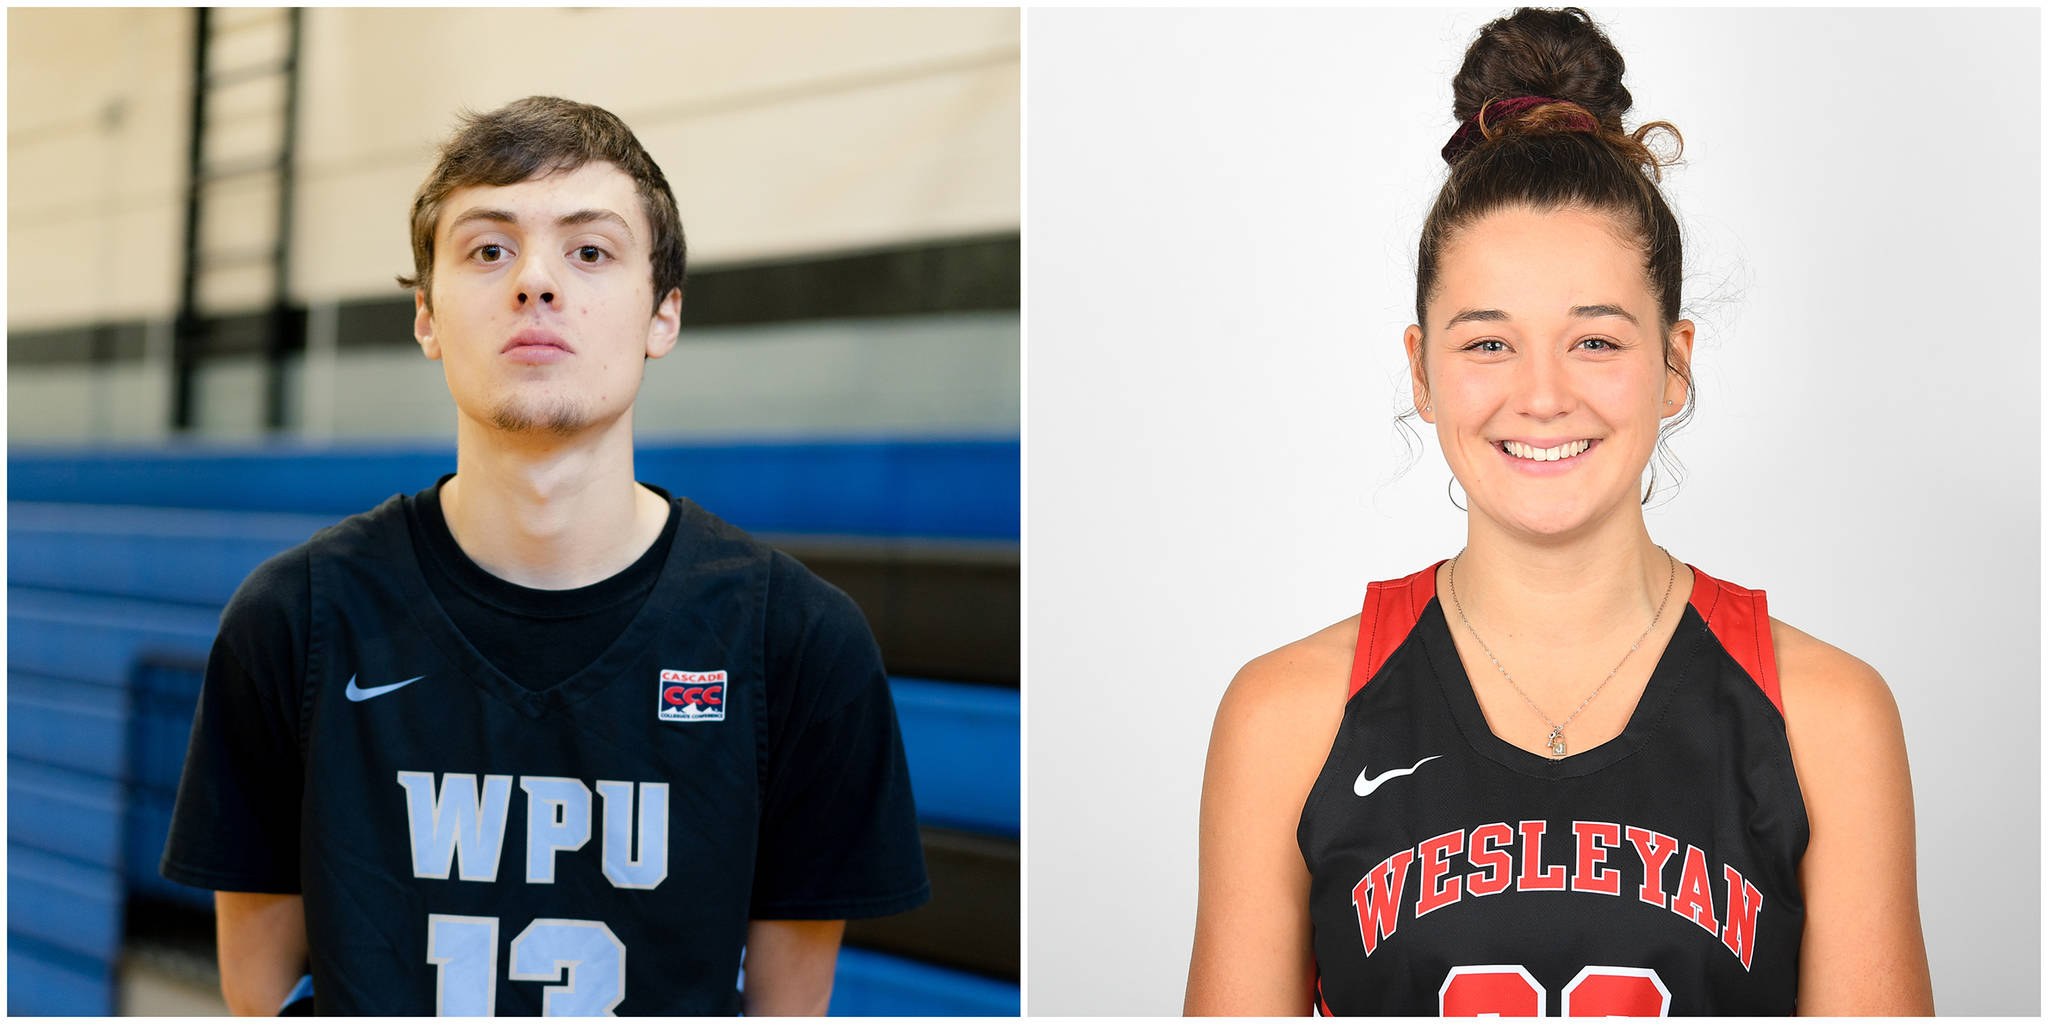 Warner Pacific University’s Kaleb Tompkins, left, and Wesleyan University’s Ava Tompkins, right. (Courtesy Photos | Cortney White and Steve McLaughlin Photography)